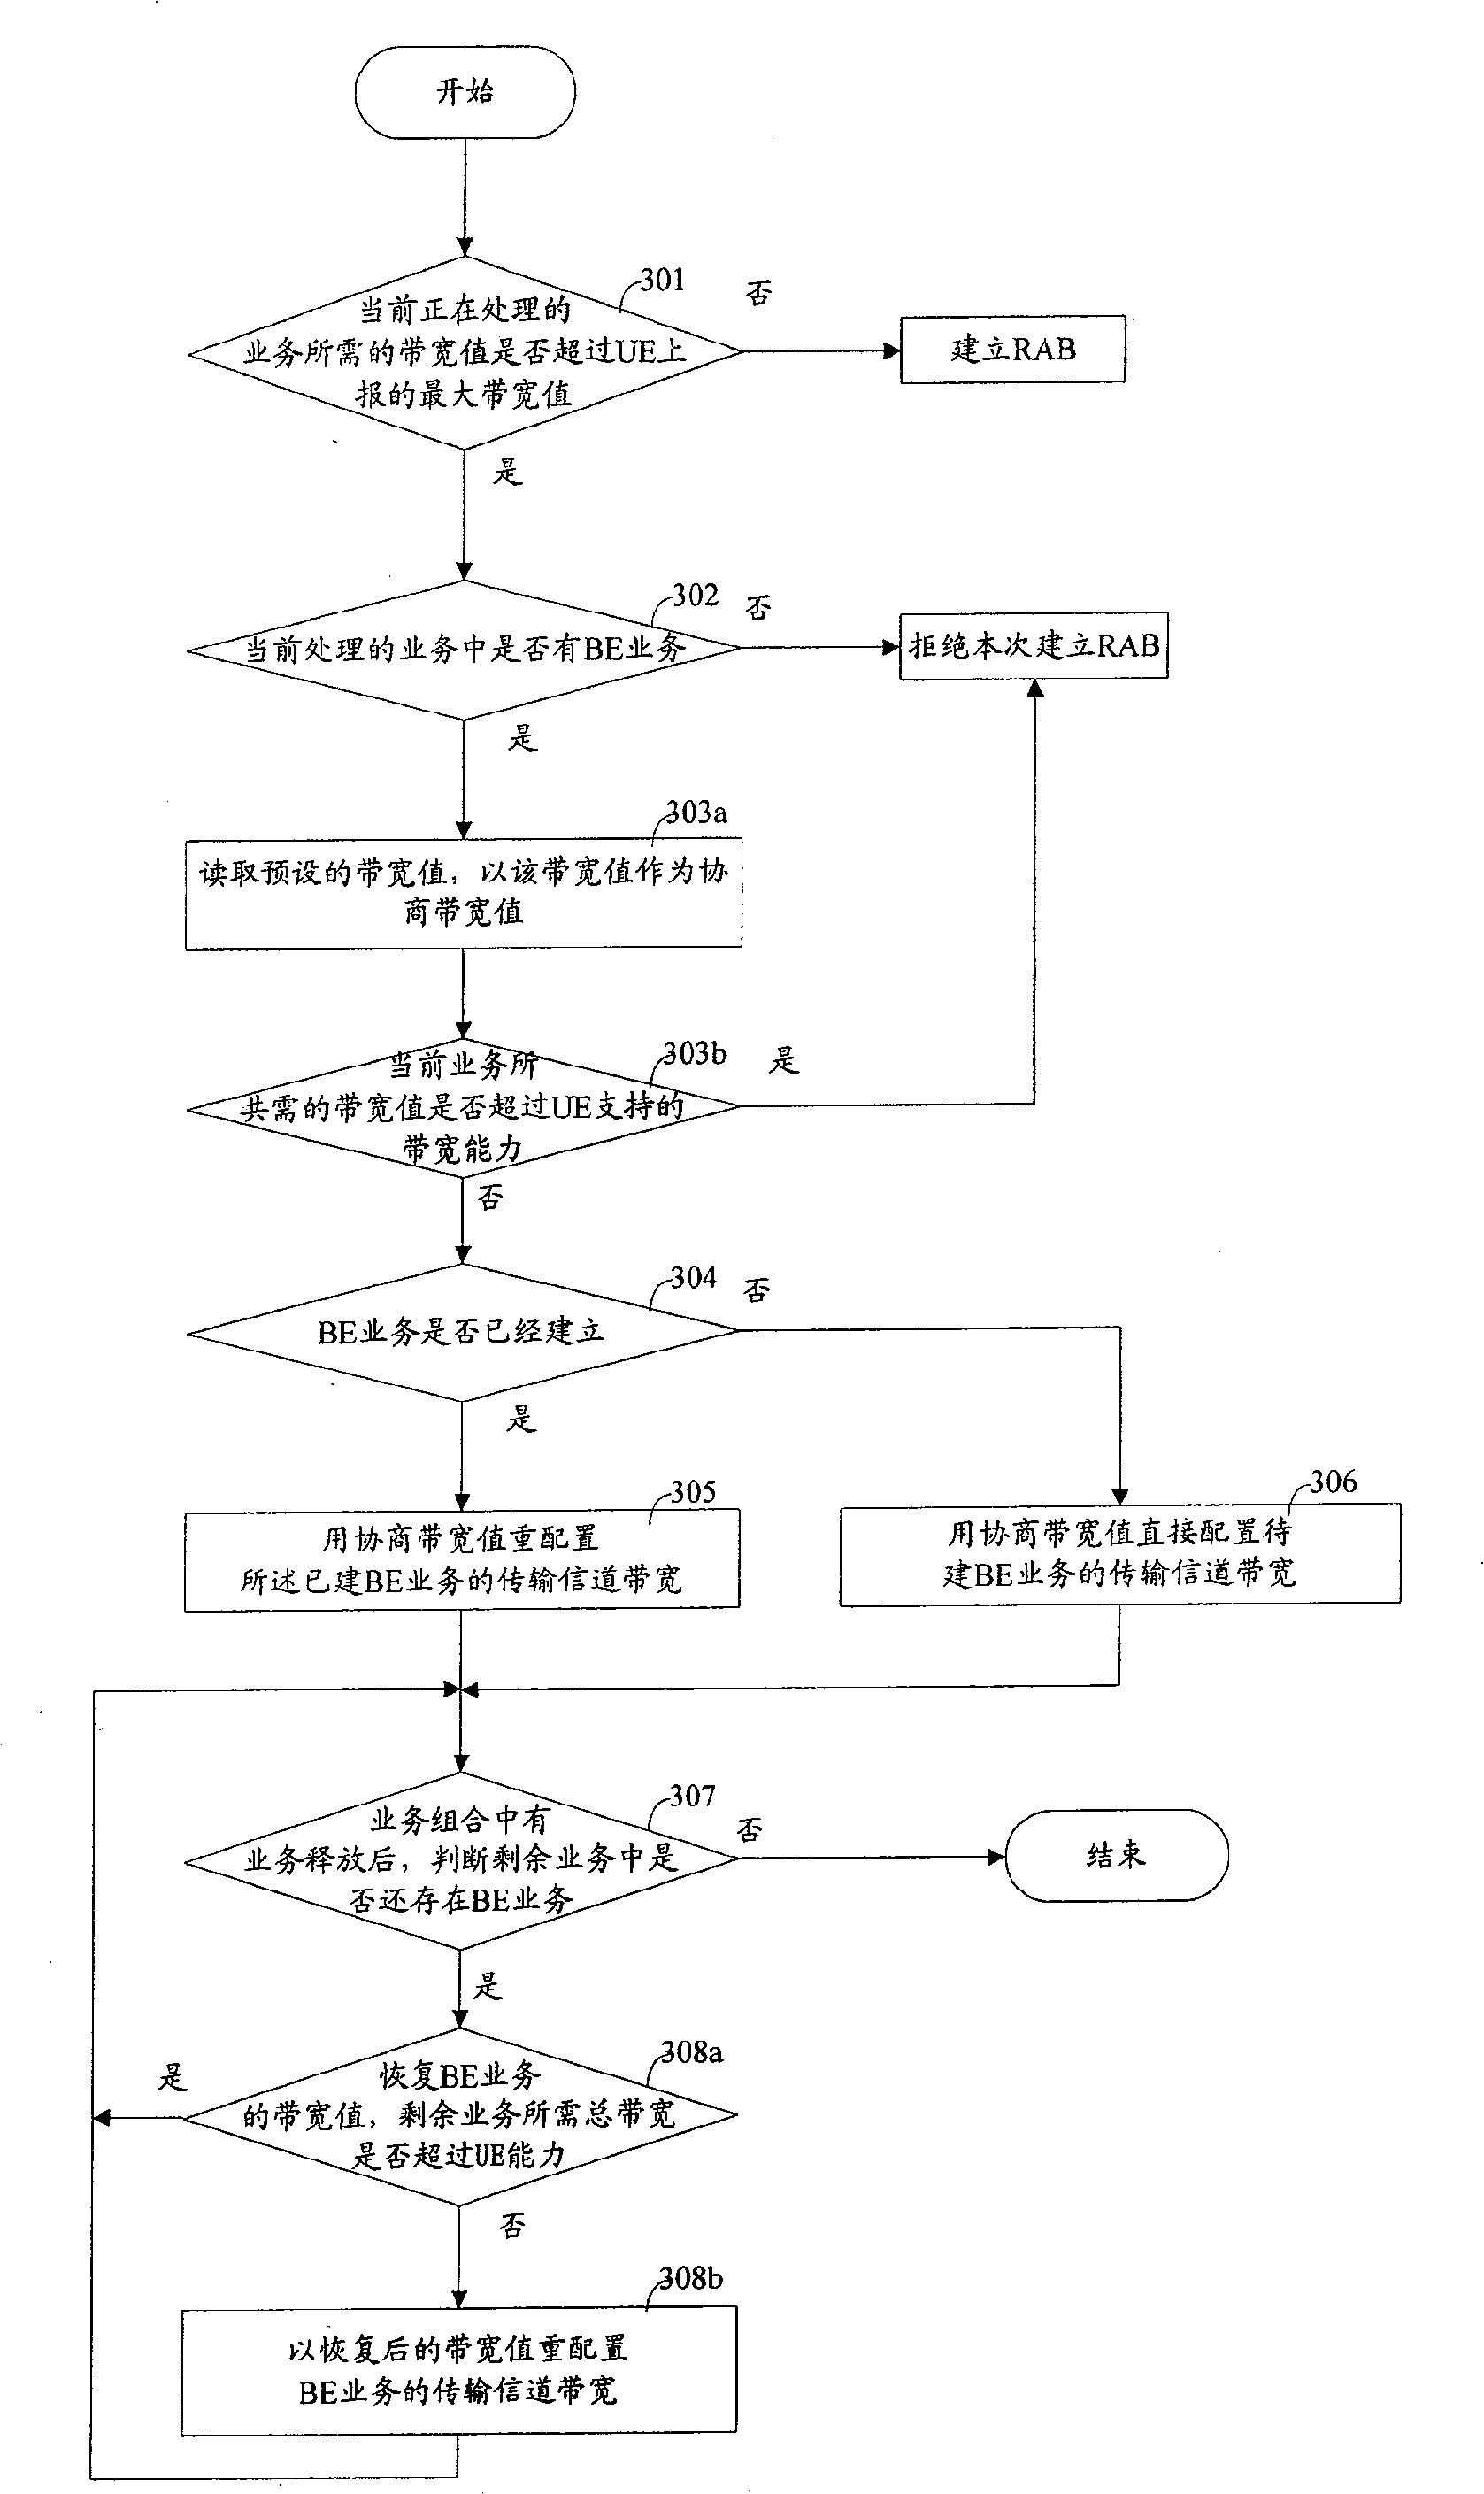 Method for improving service building success rate in mobile communication system